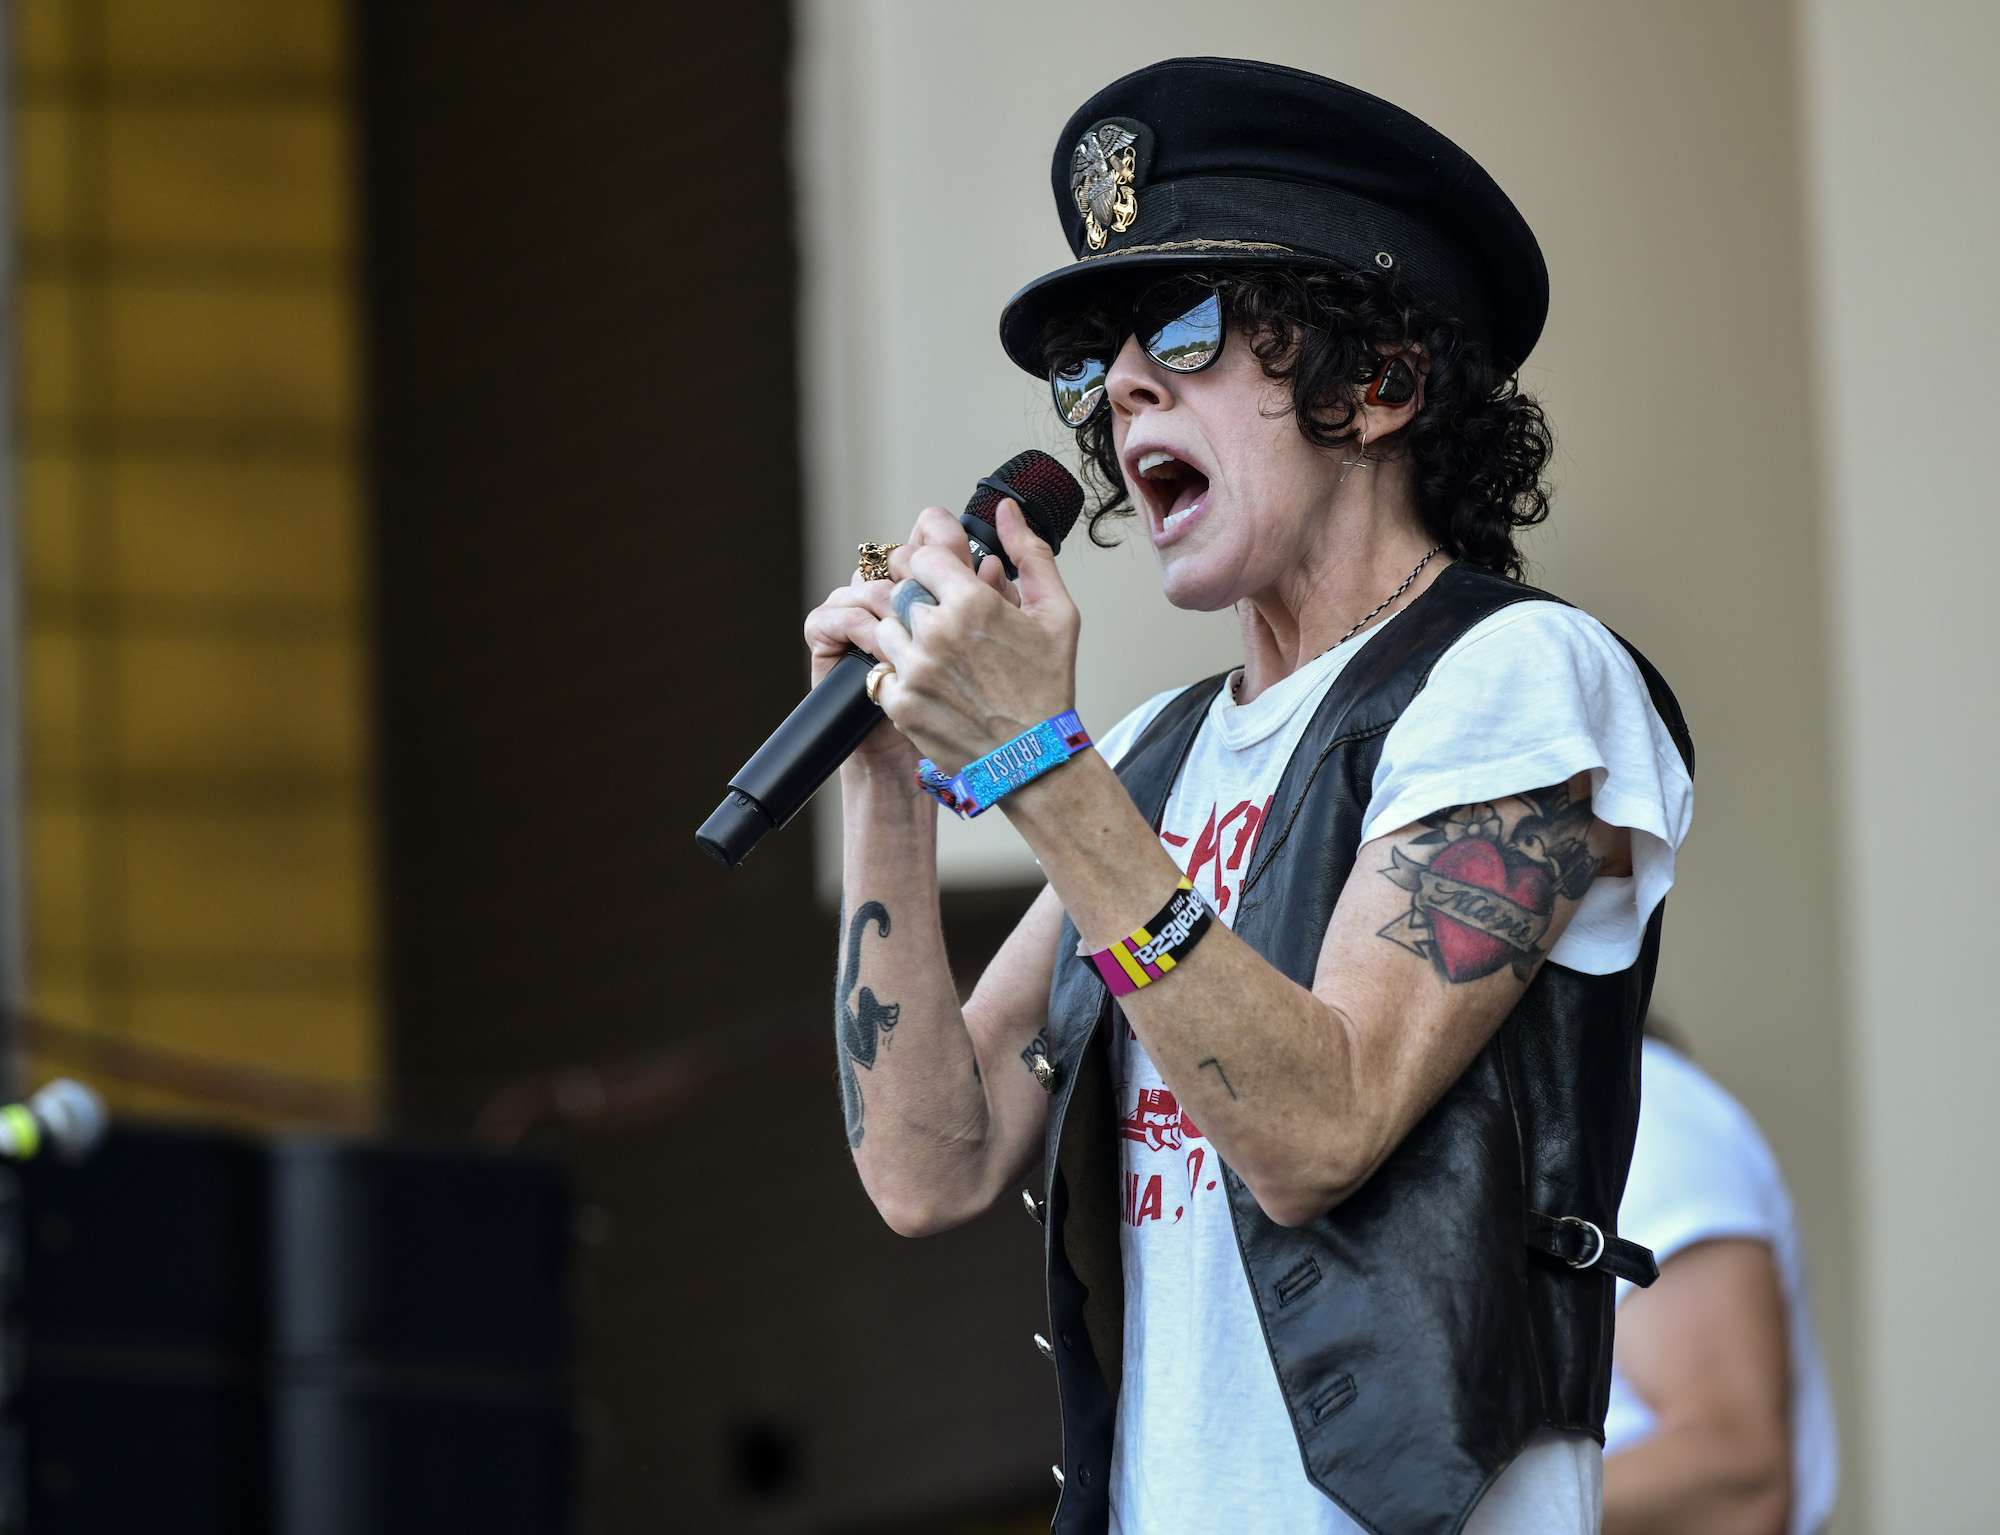 LP Live at Lollapalooza [GALLERY] 2